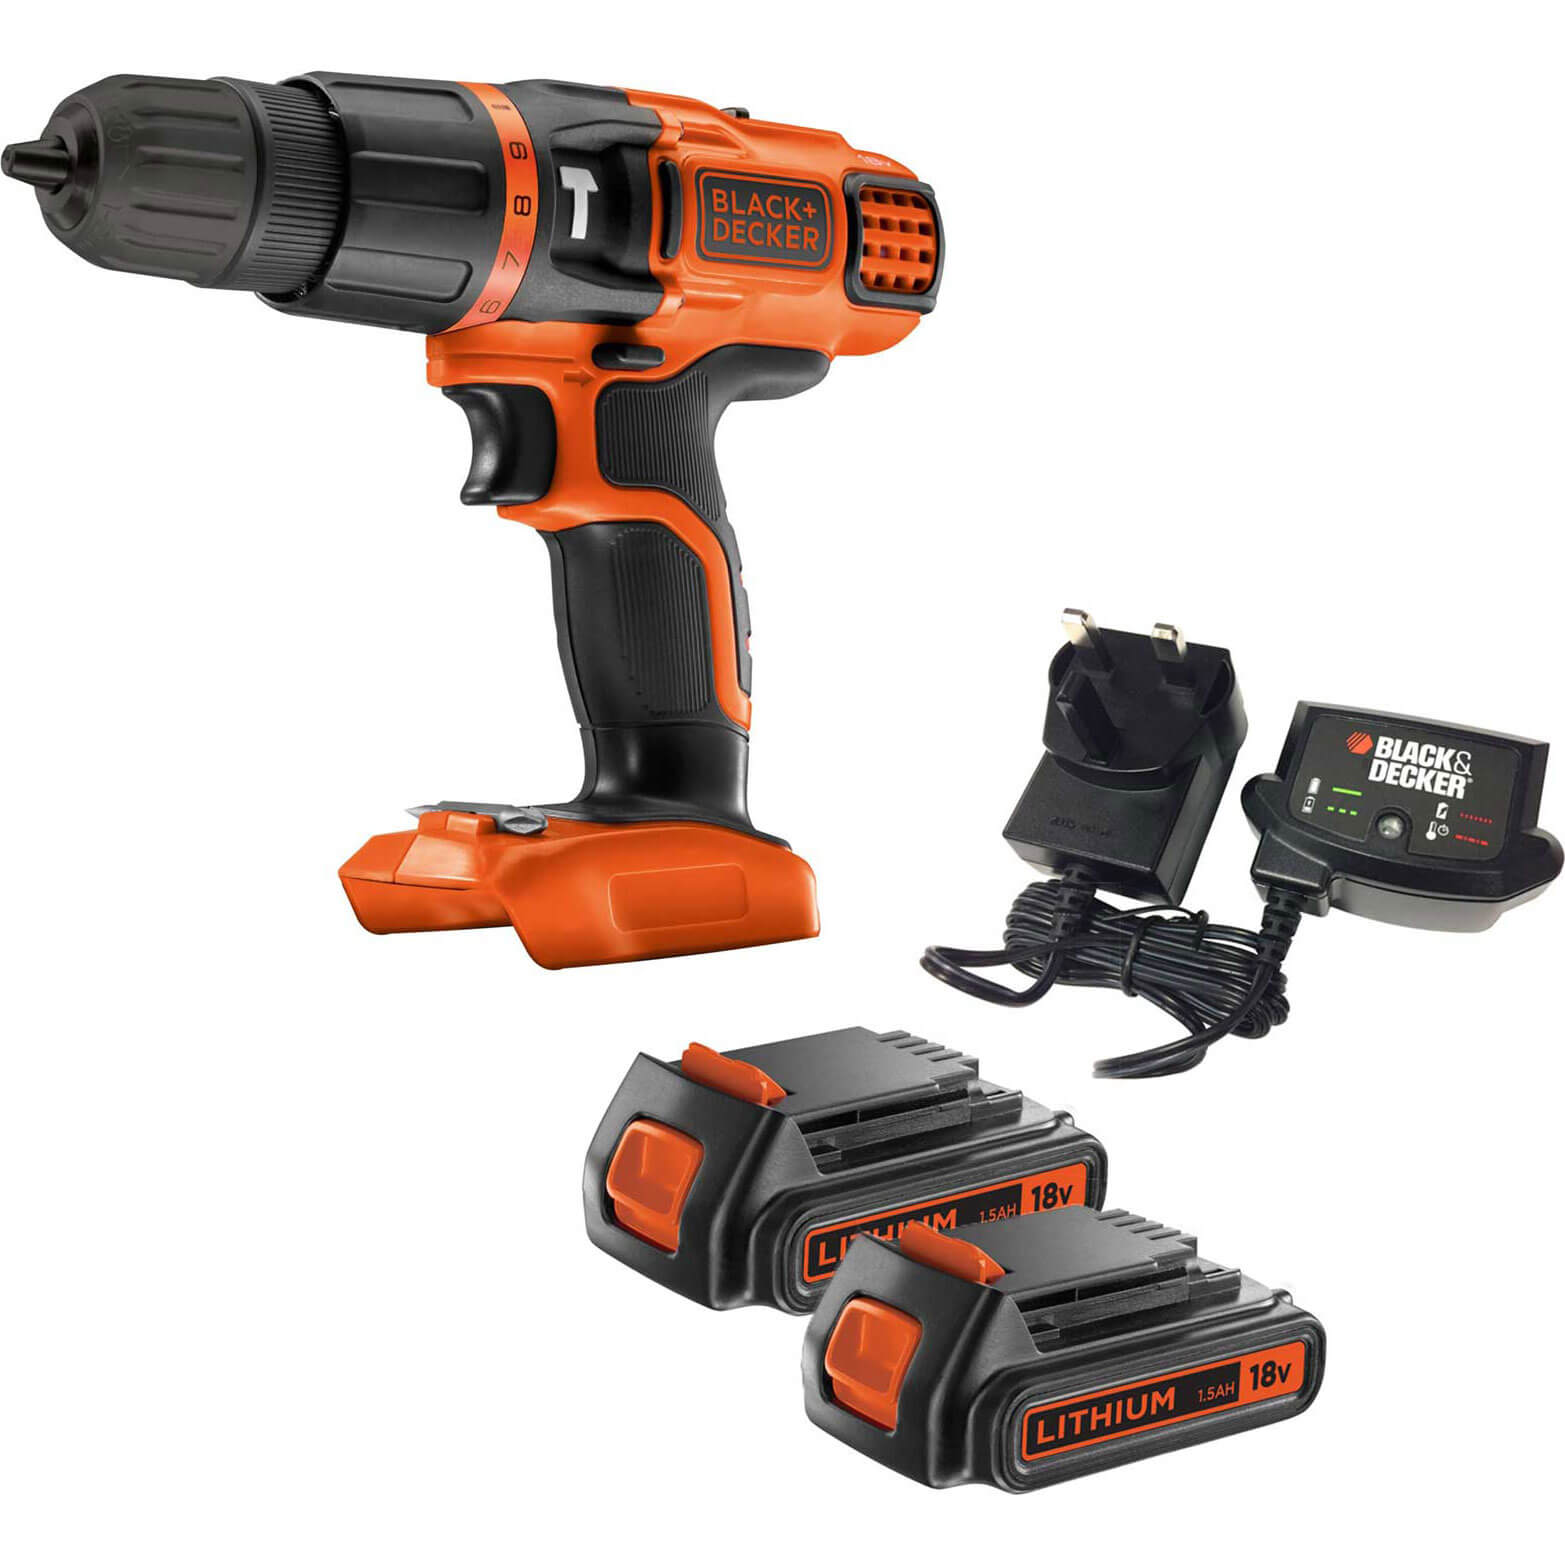 Image of Black and Decker BDCH188 18v Cordless Combi Drill 2 x 1.5ah Li-ion Charger No Case